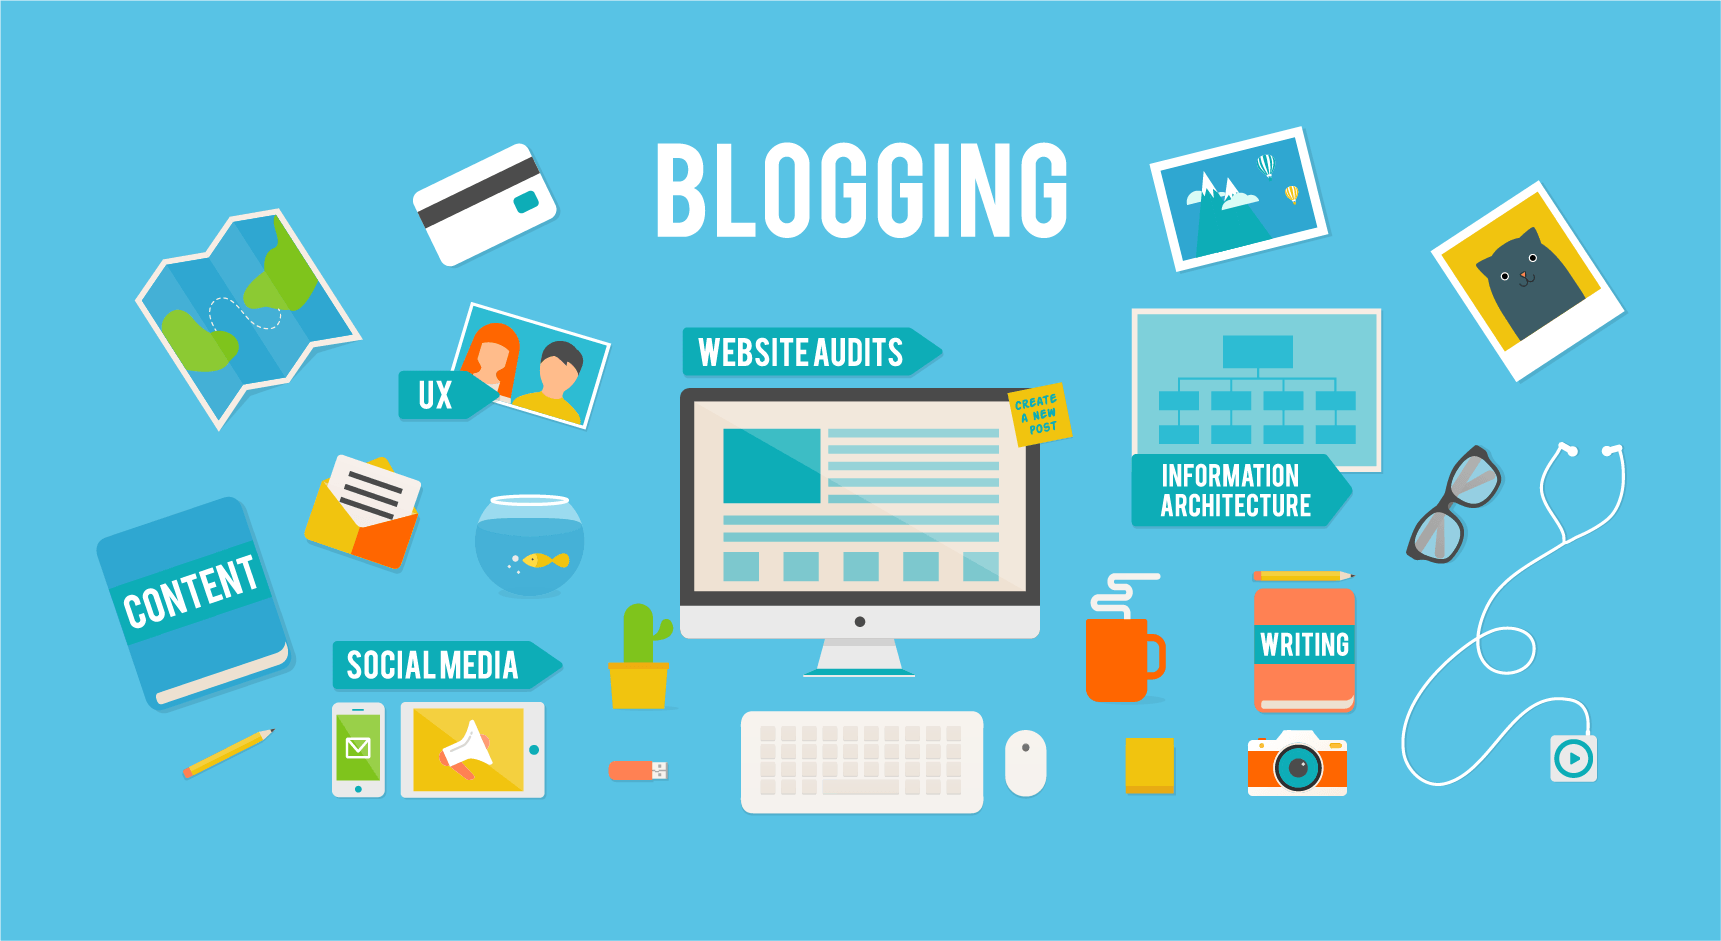 Blogging as part of the many ways to make money online using digital marketing